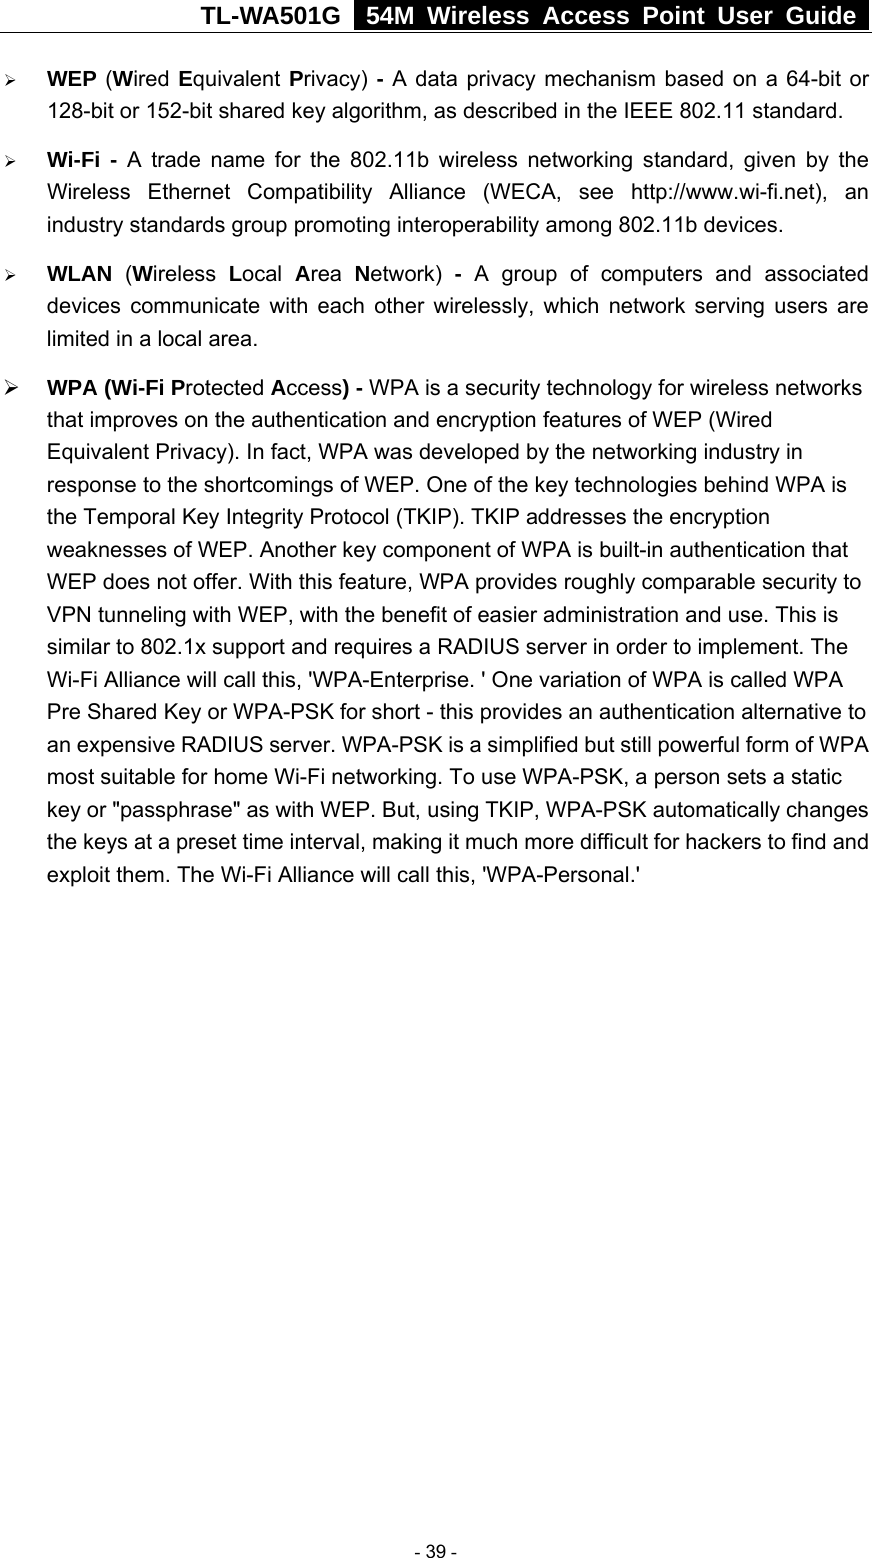 TL-WA501G   54M Wireless Access Point User Guide  ¾ WEP (Wired Equivalent Privacy) - A data privacy mechanism based on a 64-bit or 128-bit or 152-bit shared key algorithm, as described in the IEEE 802.11 standard.   ¾ Wi-Fi - A trade name for the 802.11b wireless networking standard, given by the Wireless Ethernet Compatibility Alliance (WECA, see http://www.wi-fi.net), an industry standards group promoting interoperability among 802.11b devices. ¾ WLAN  (Wireless  Local  Area  Network)  - A group of computers and associated devices communicate with each other wirelessly, which network serving users are limited in a local area. ¾ WPA (Wi-Fi Protected Access) - WPA is a security technology for wireless networks that improves on the authentication and encryption features of WEP (Wired Equivalent Privacy). In fact, WPA was developed by the networking industry in response to the shortcomings of WEP. One of the key technologies behind WPA is the Temporal Key Integrity Protocol (TKIP). TKIP addresses the encryption weaknesses of WEP. Another key component of WPA is built-in authentication that WEP does not offer. With this feature, WPA provides roughly comparable security to VPN tunneling with WEP, with the benefit of easier administration and use. This is similar to 802.1x support and requires a RADIUS server in order to implement. The Wi-Fi Alliance will call this, &apos;WPA-Enterprise. &apos; One variation of WPA is called WPA Pre Shared Key or WPA-PSK for short - this provides an authentication alternative to an expensive RADIUS server. WPA-PSK is a simplified but still powerful form of WPA most suitable for home Wi-Fi networking. To use WPA-PSK, a person sets a static key or &quot;passphrase&quot; as with WEP. But, using TKIP, WPA-PSK automatically changes the keys at a preset time interval, making it much more difficult for hackers to find and exploit them. The Wi-Fi Alliance will call this, &apos;WPA-Personal.&apos;             - 39 - 